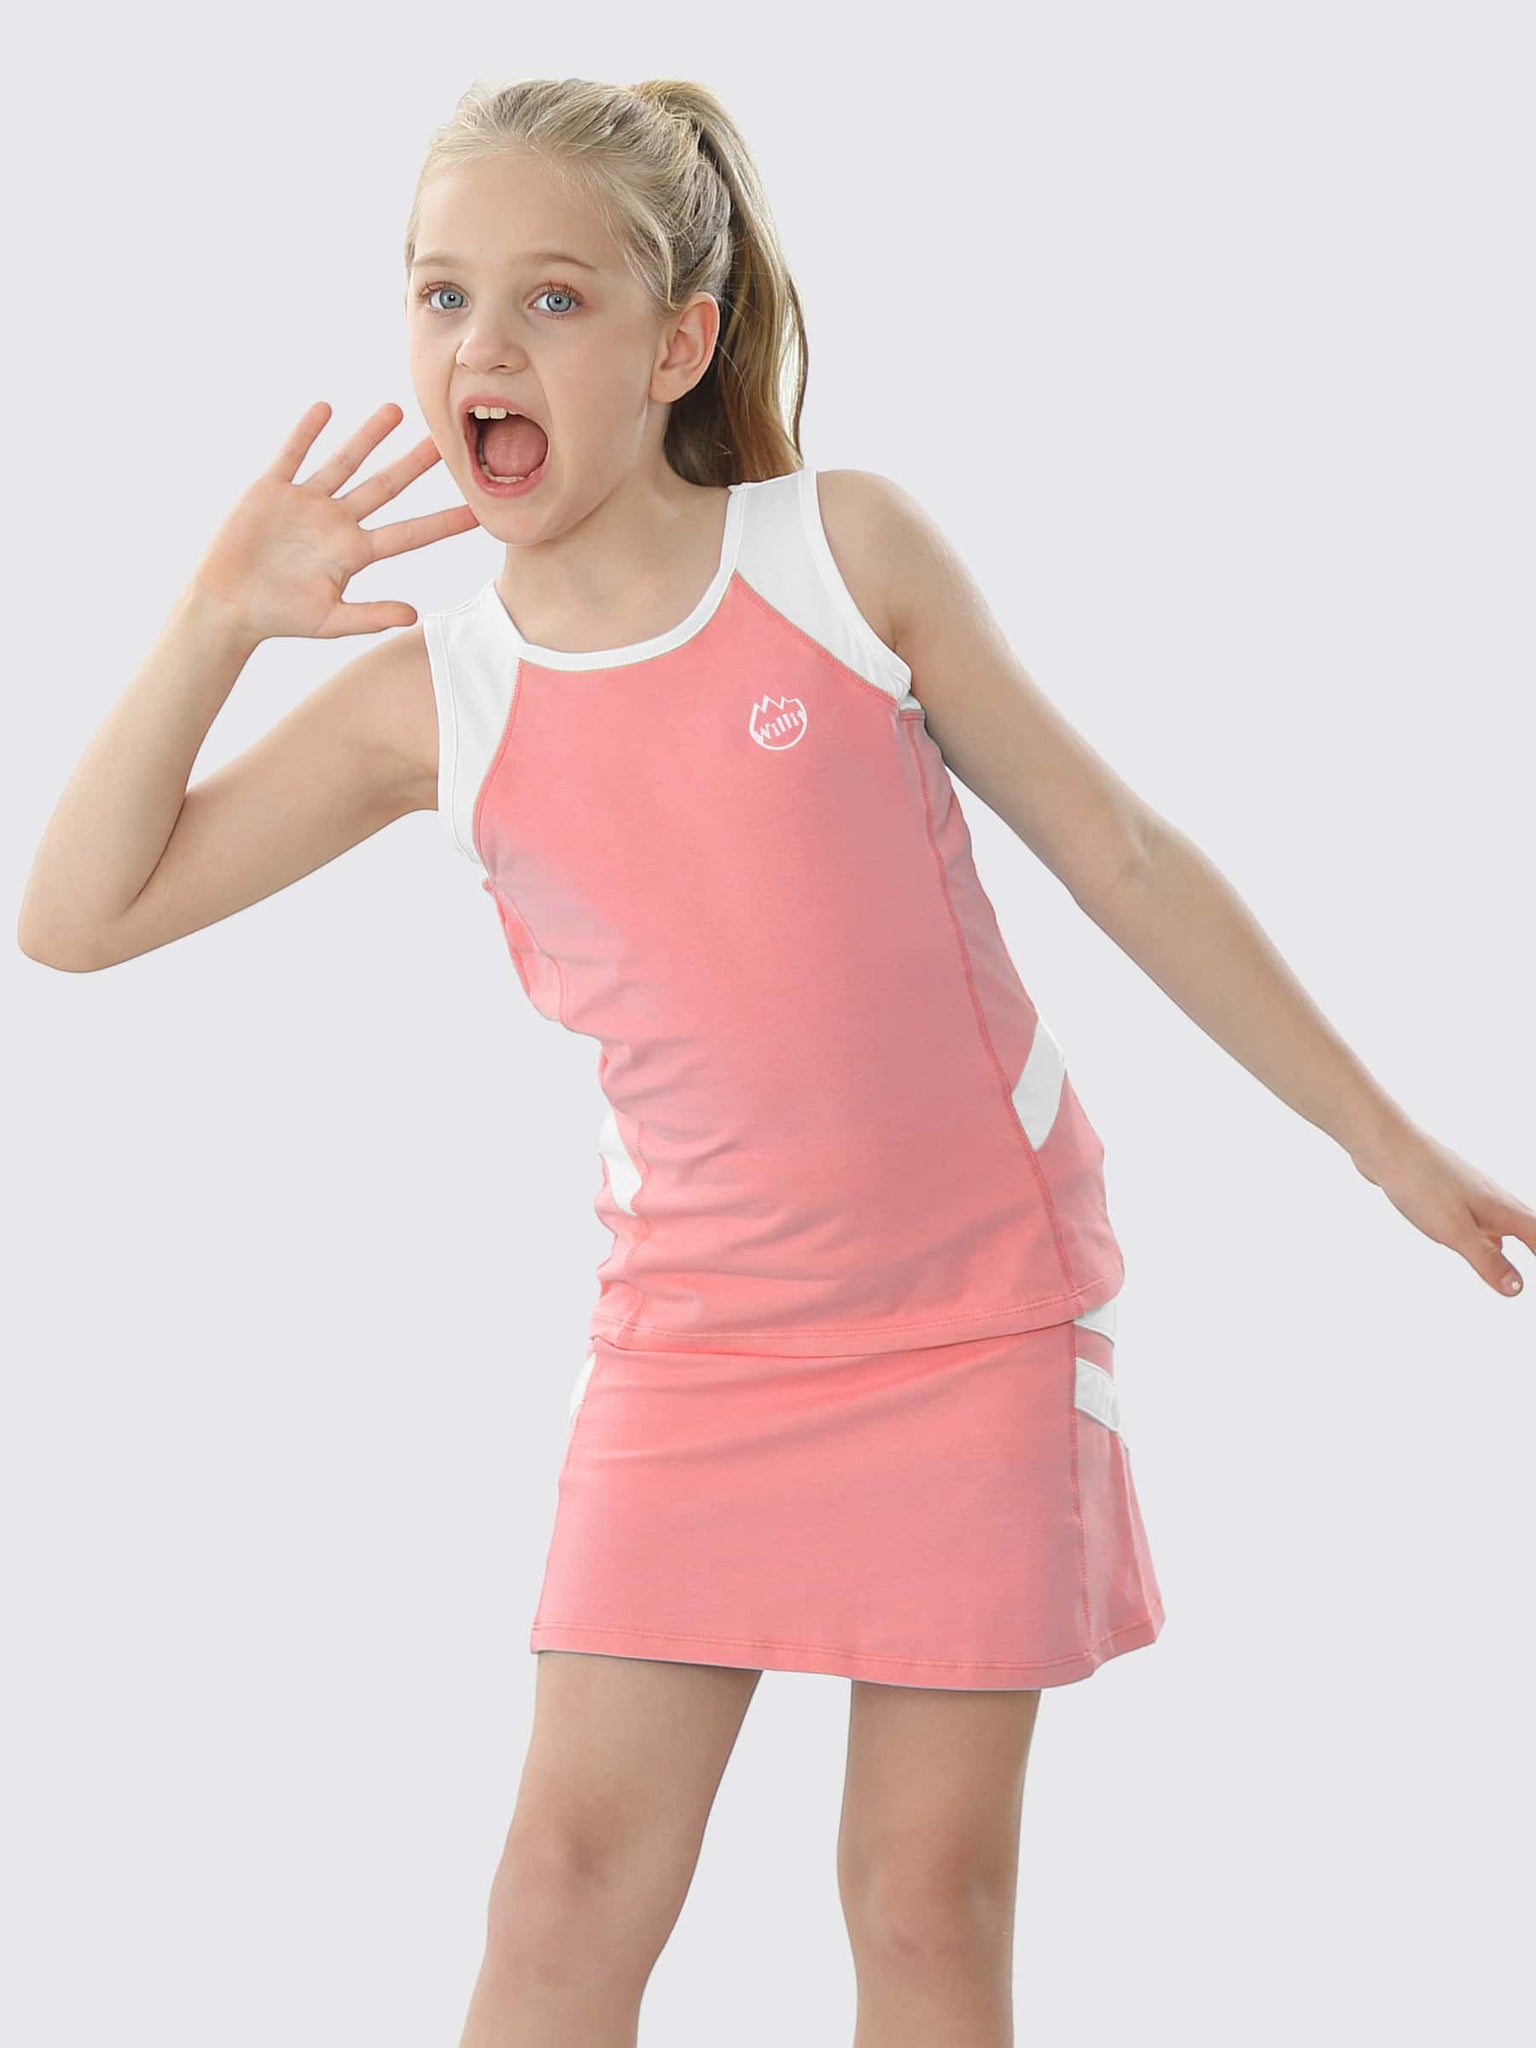 Willit Girls' Tennis Outfit_Pink_model1